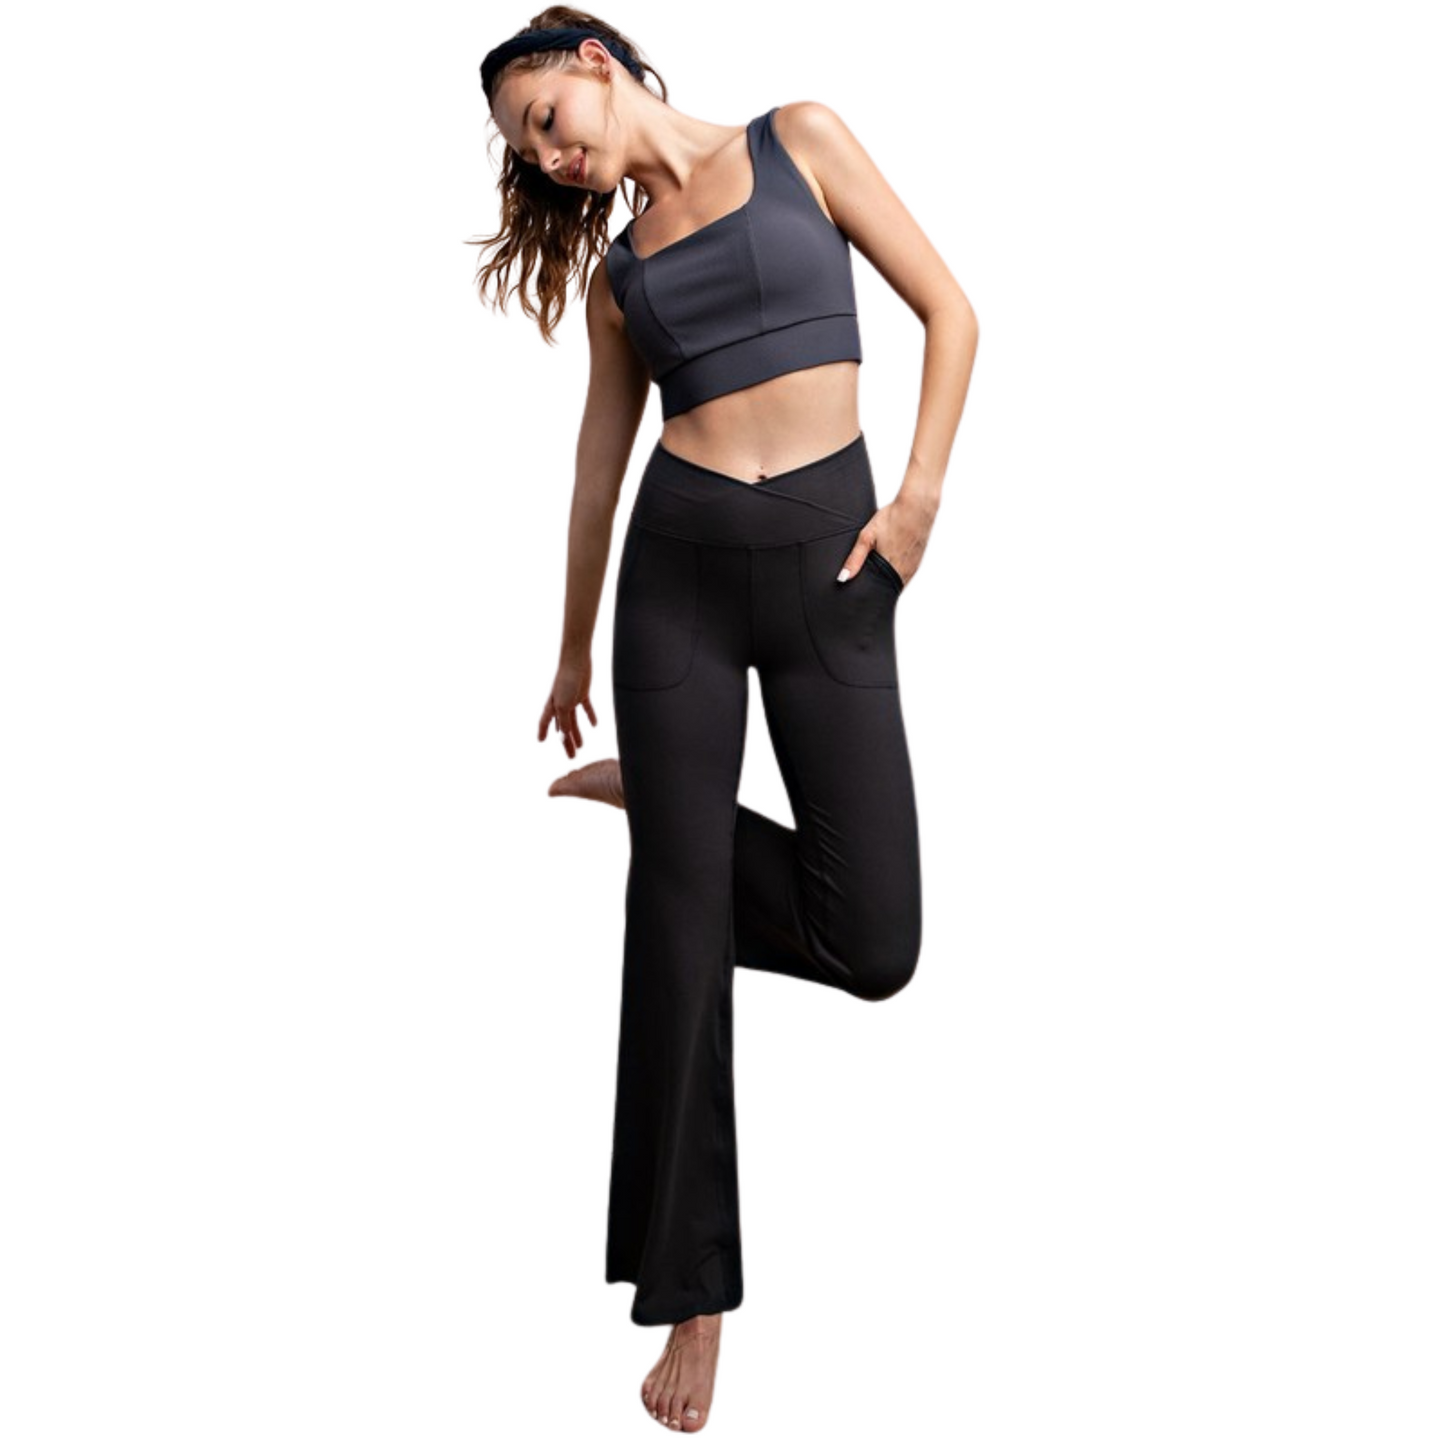 These black, full length butter yoga pants are designed for women and provide a buttery soft feel. The V waist and flared bell bottoms offer extra comfort and style, while the pockets provide convenience. Perfect for any yoga class or casual wear.